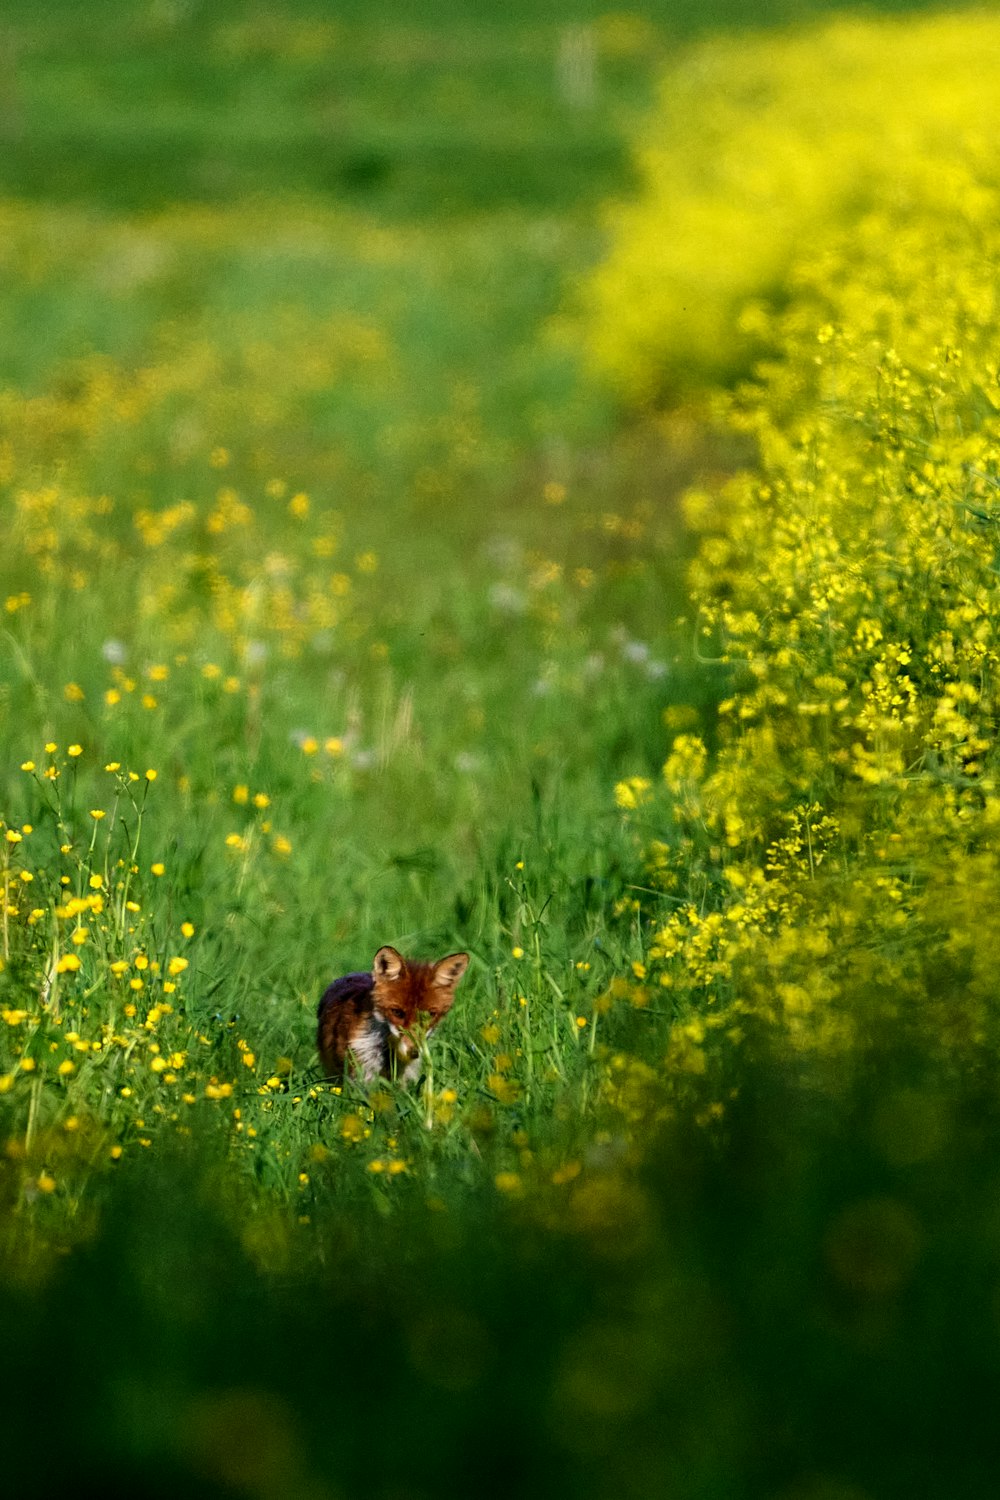 a cat sitting in a field of yellow flowers